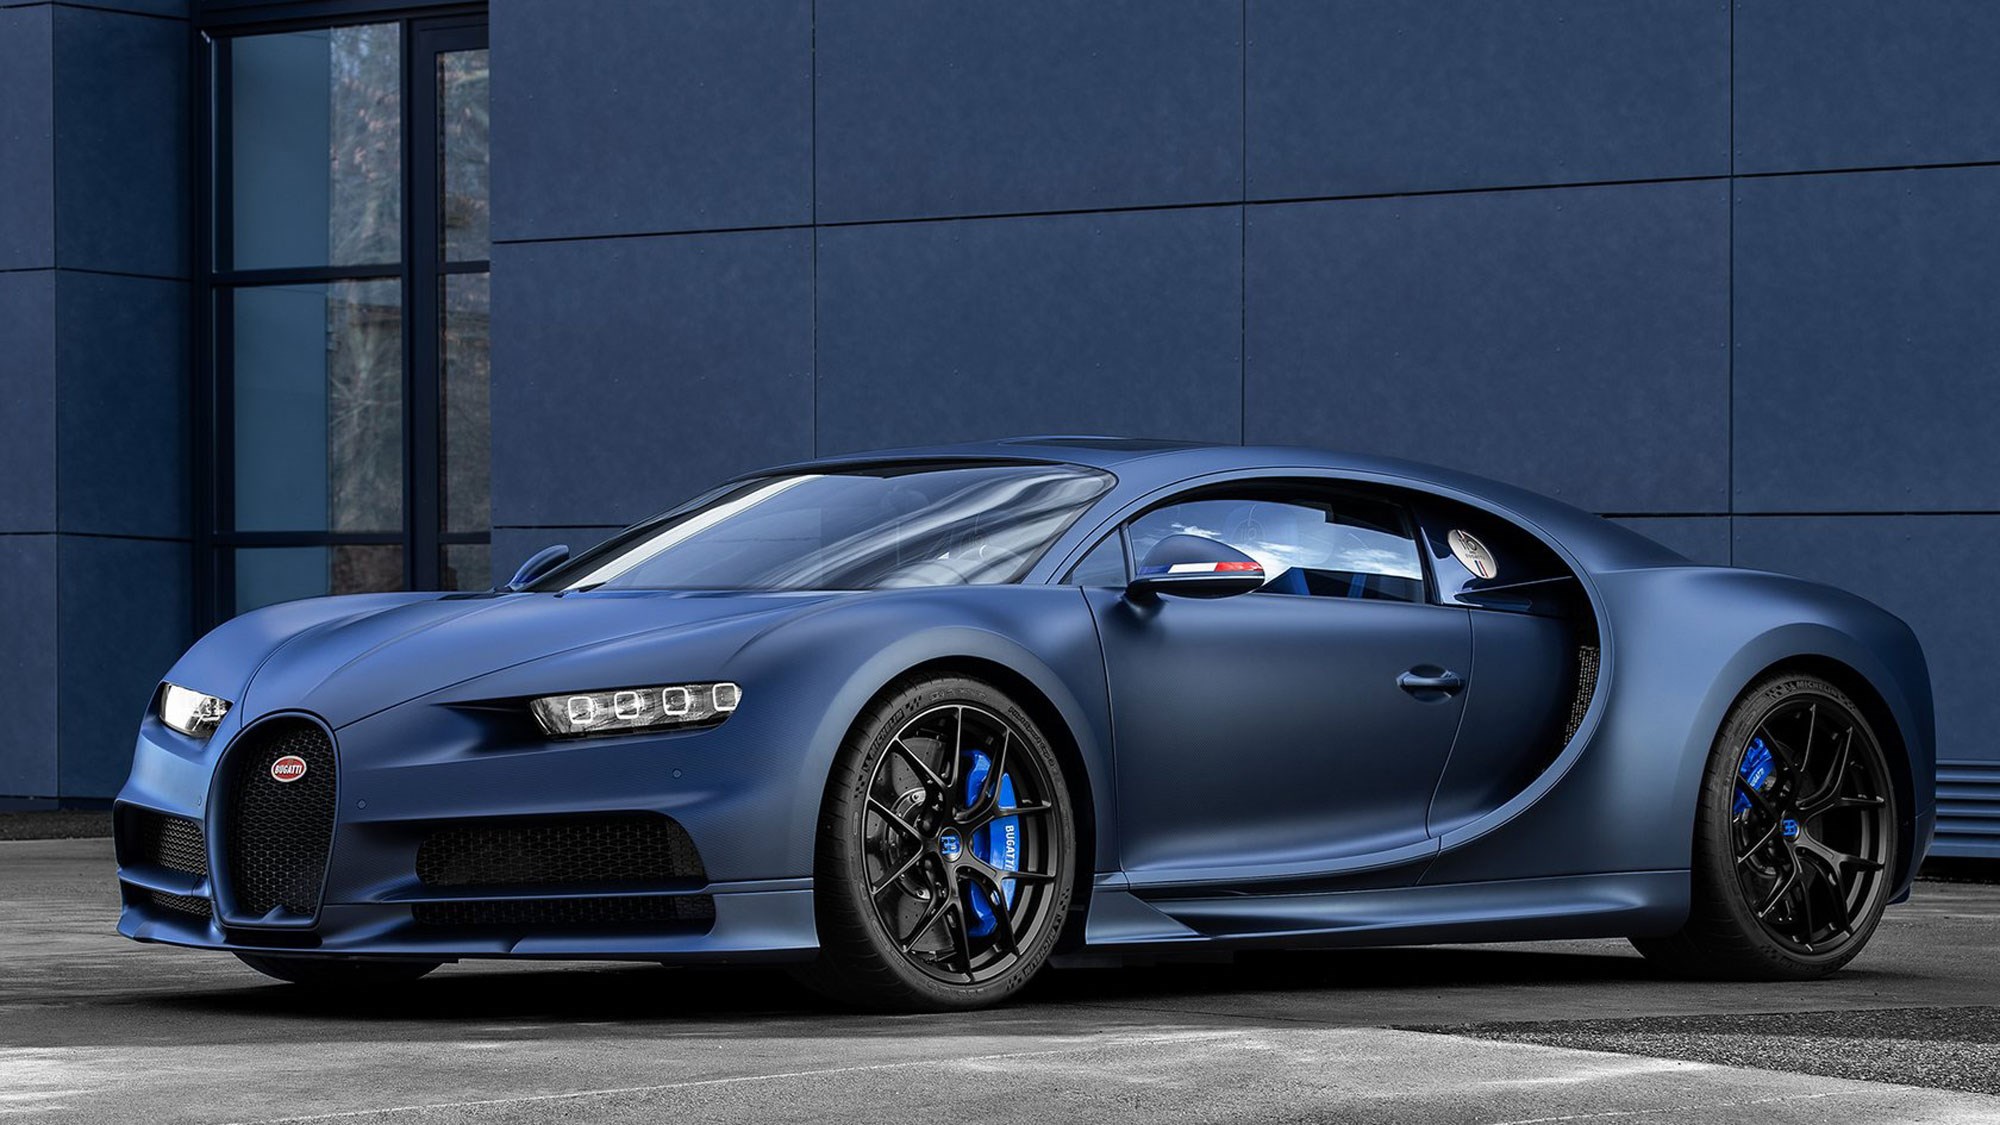 Check Out This New Bugatti Chiron Sport Finished In 'Petrol Blue